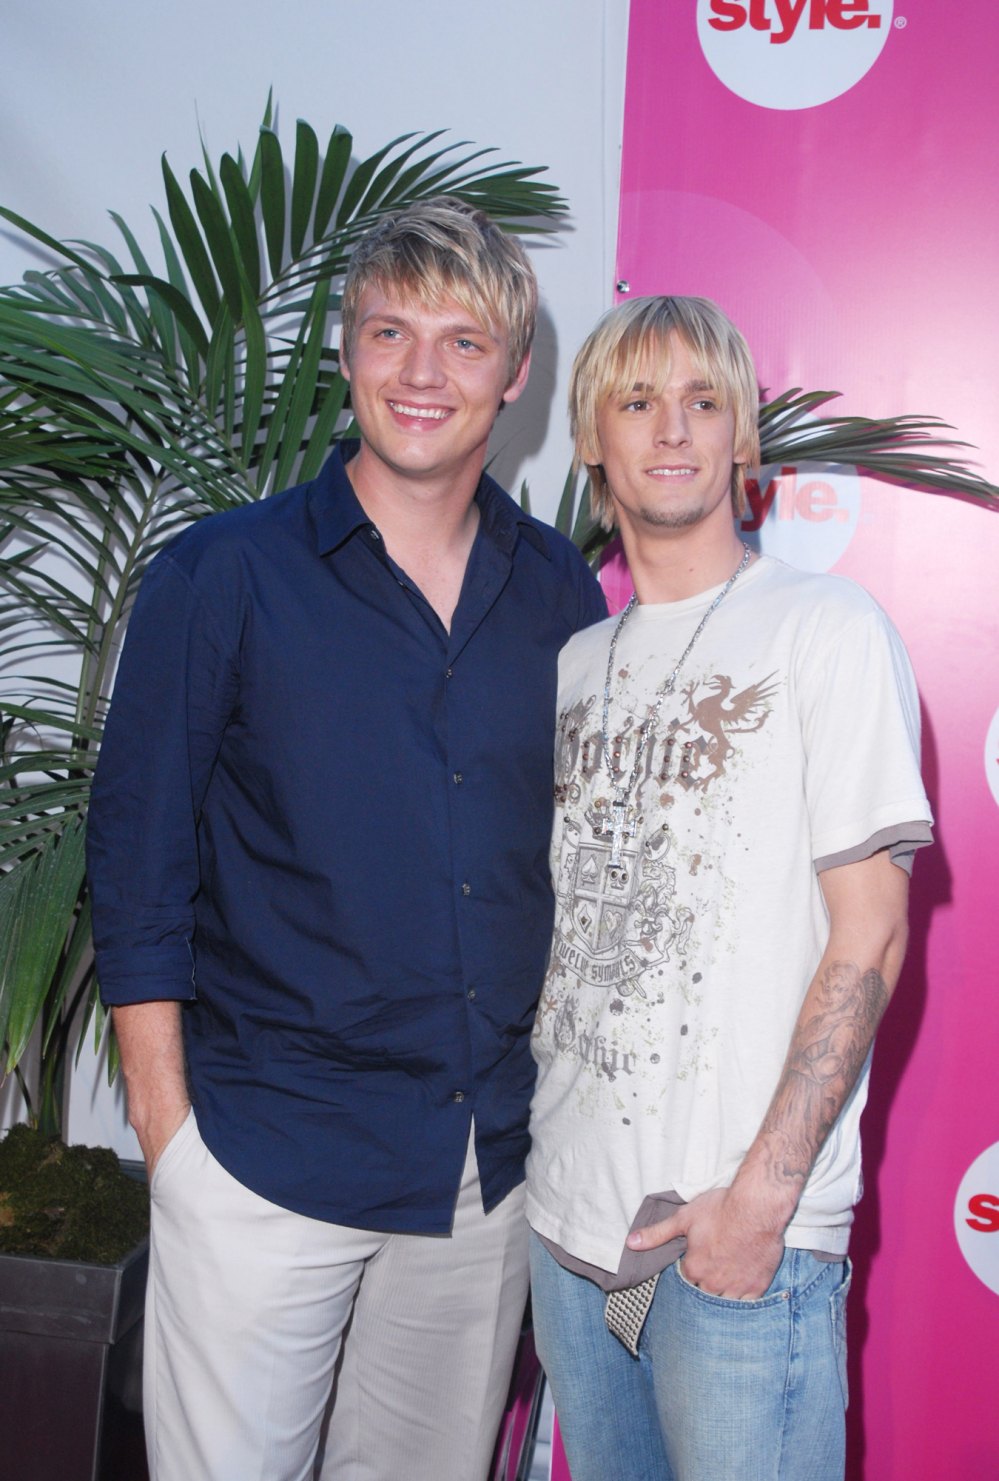 Nick Carter and Aaron Carter will be subjects of upcoming documentaries